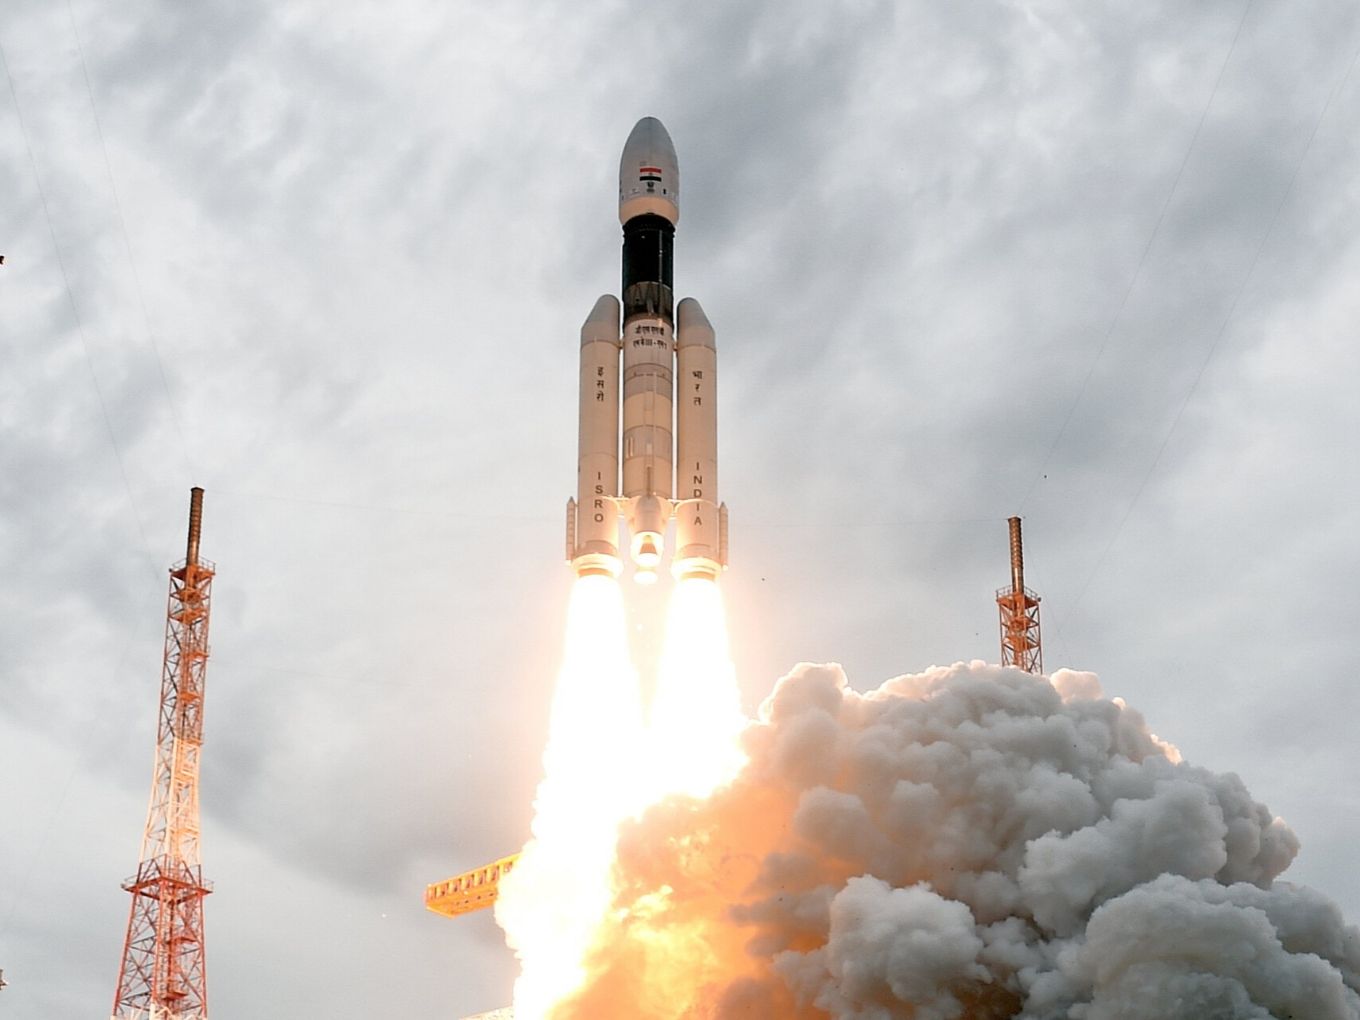 Chandrayaan 3 Under Way: Details about Lunar Probe, Launch Date & More